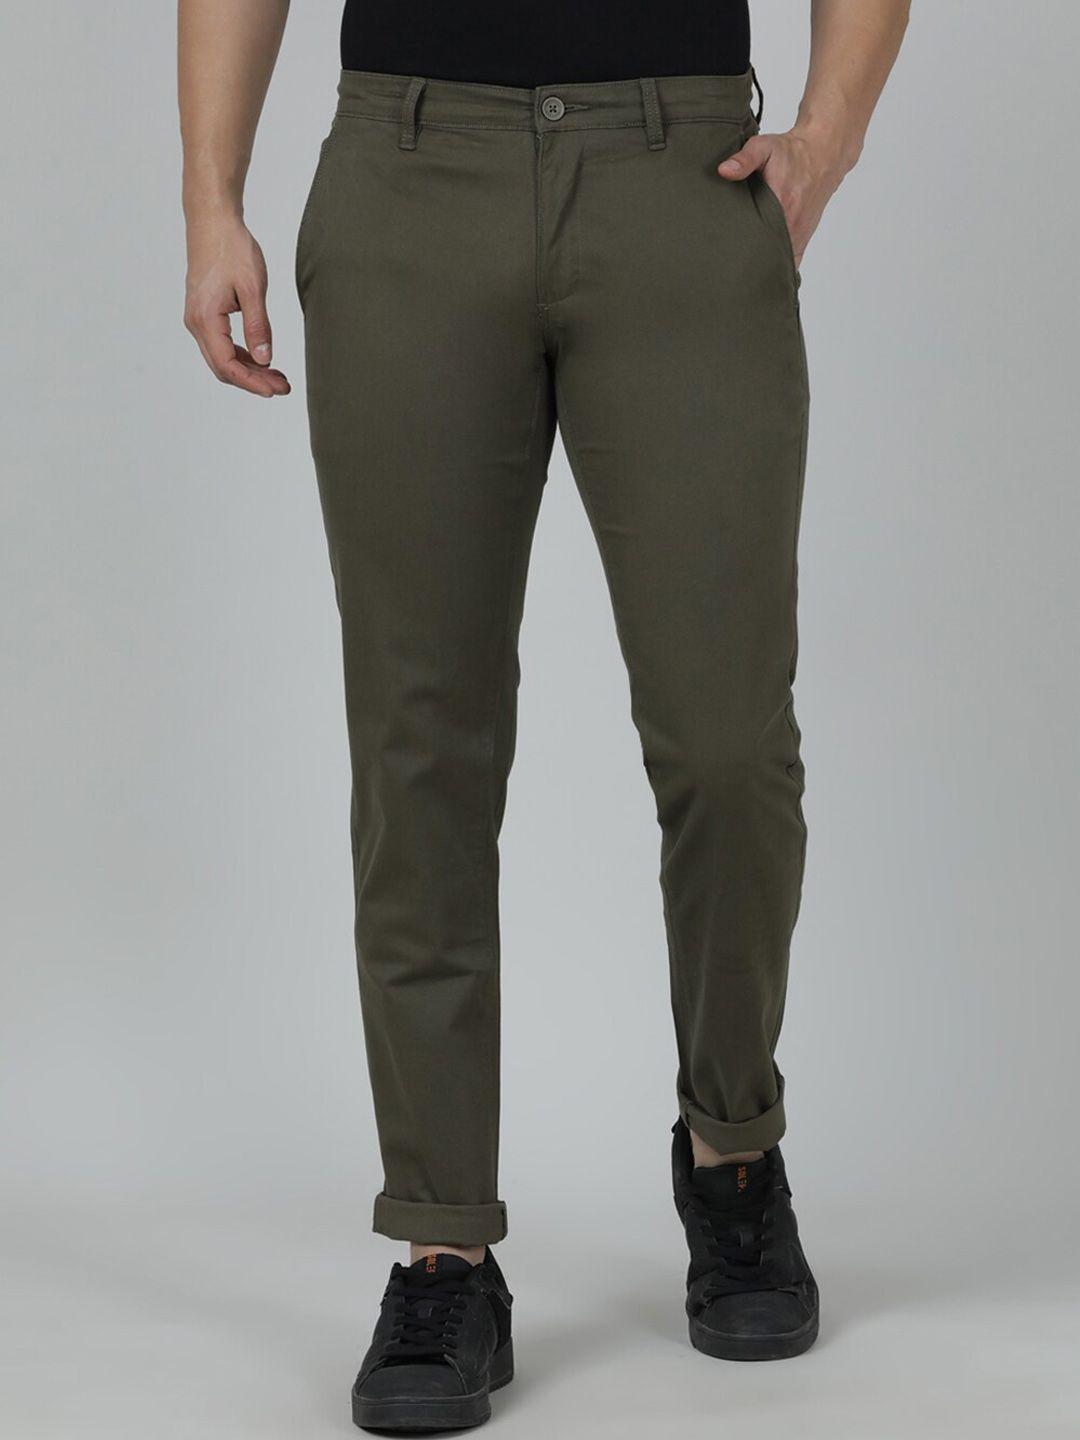 crocodile men tapered fit easy wash cotton trousers